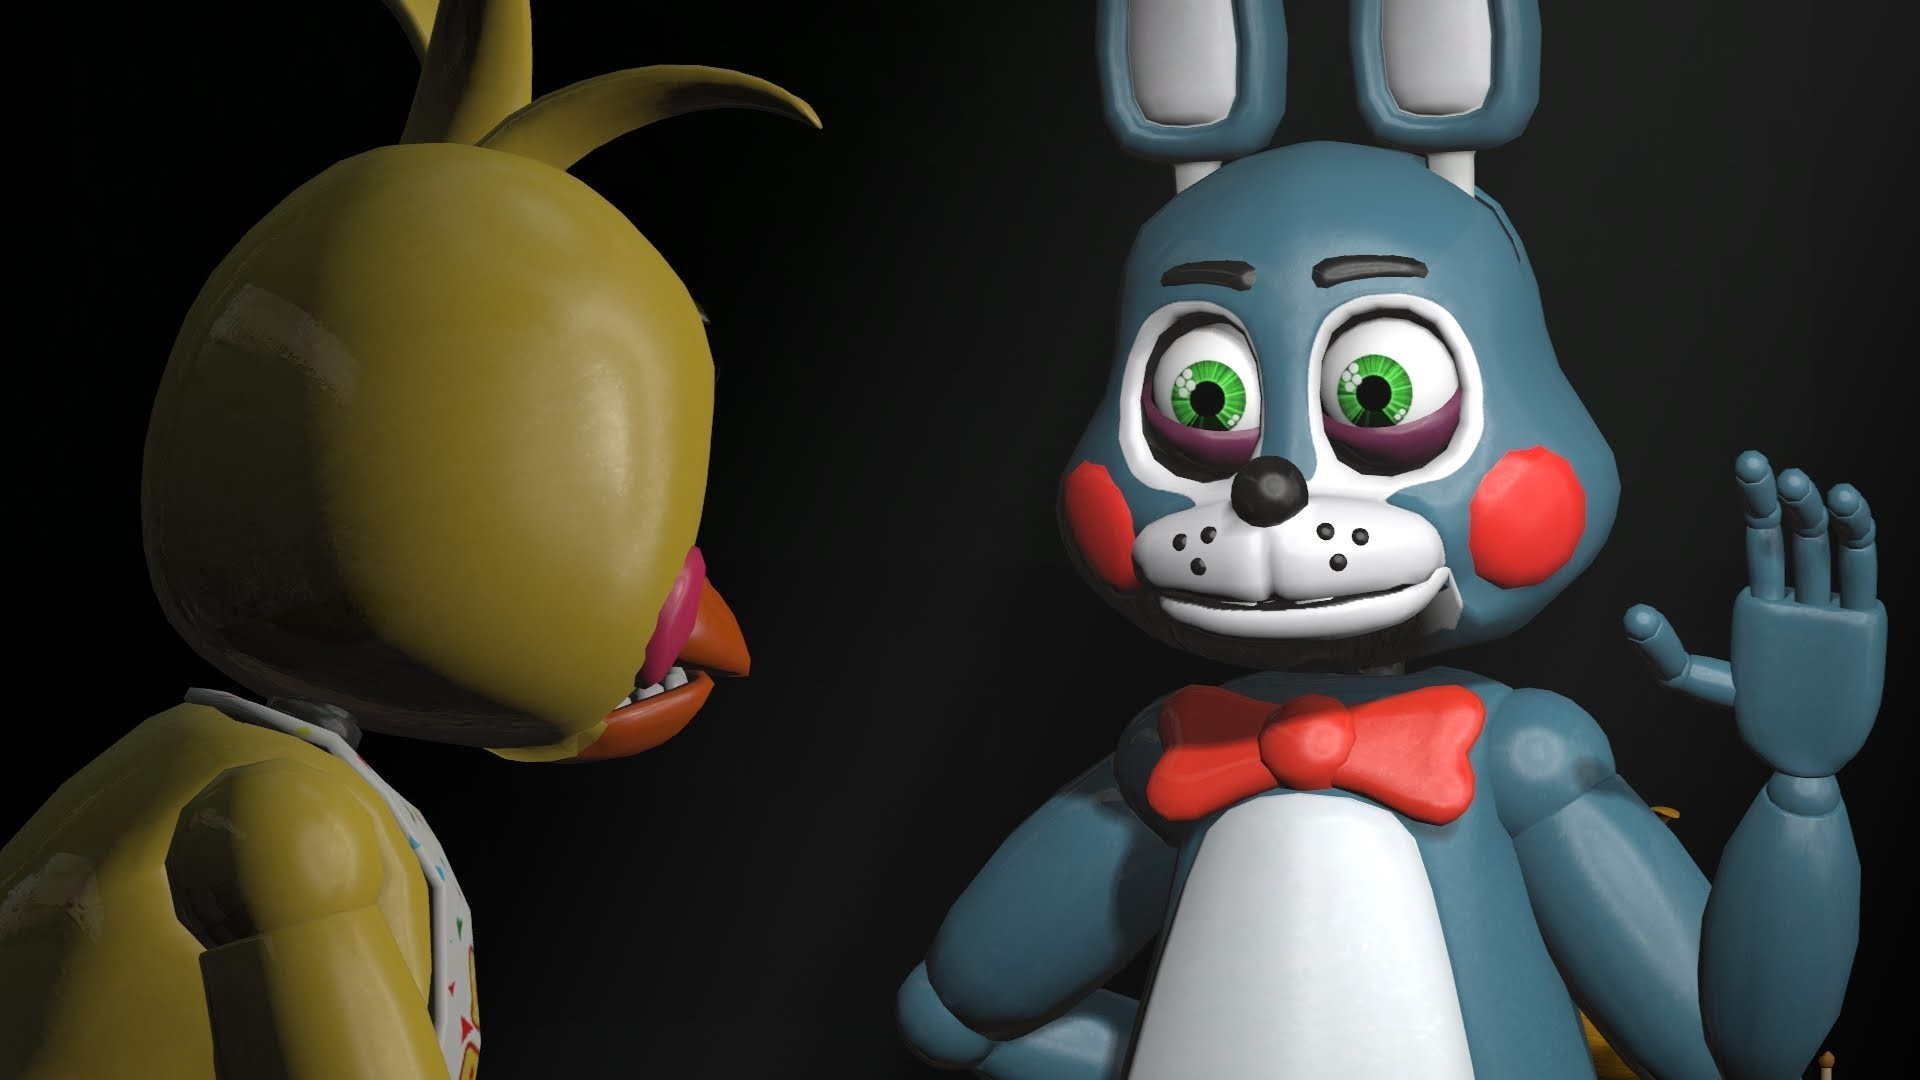 1920x1080  Steam Workshop :: Five Nights at Freddy's 2 Toys